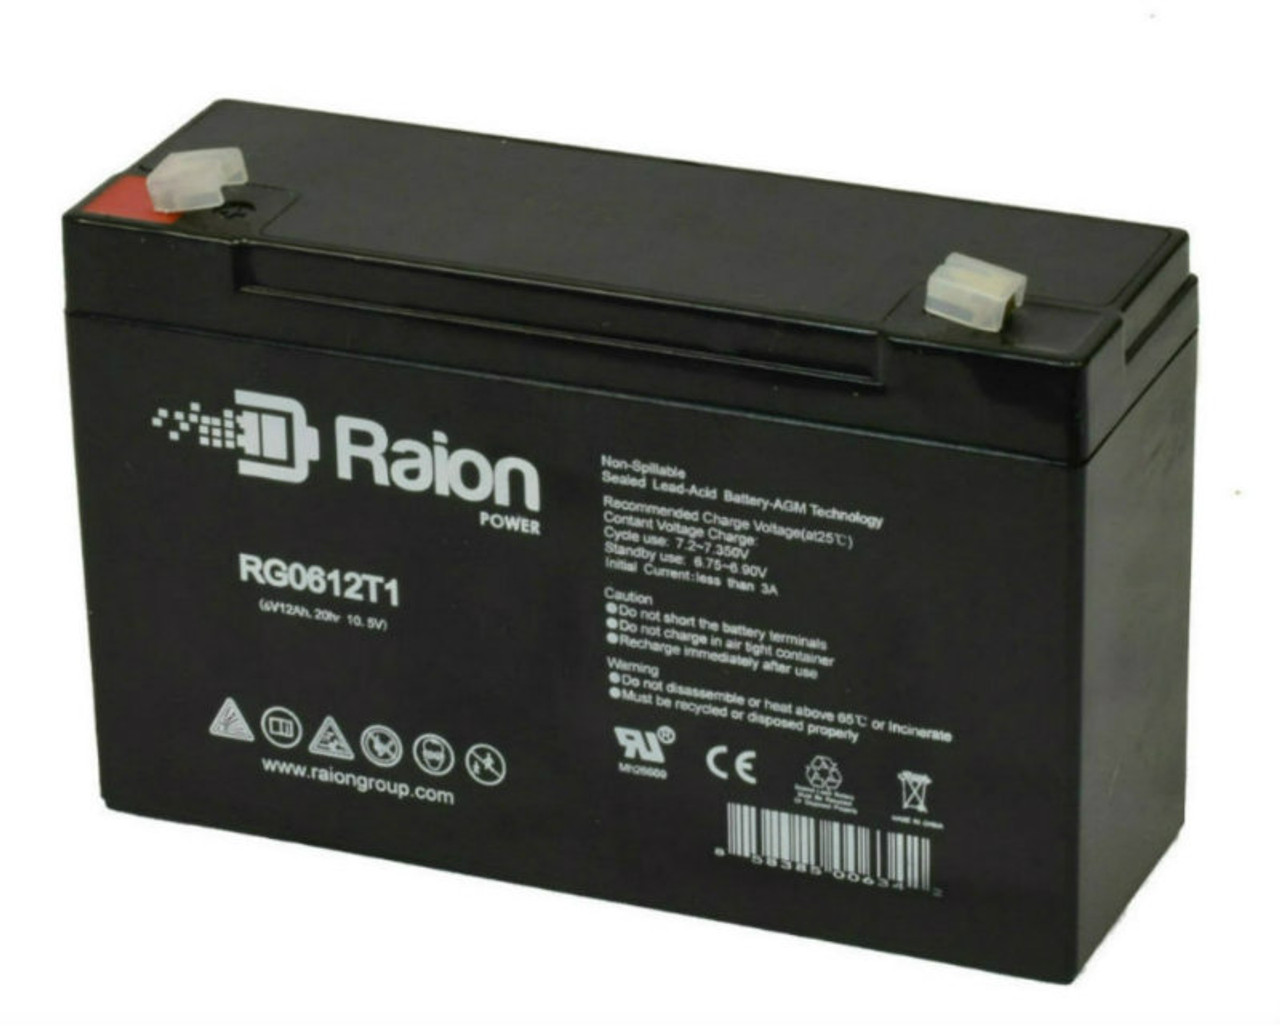 Raion Power RG06120T1 Replacement Emergency Light Battery for Dual-Lite 12-727 / 12727 / 0120727